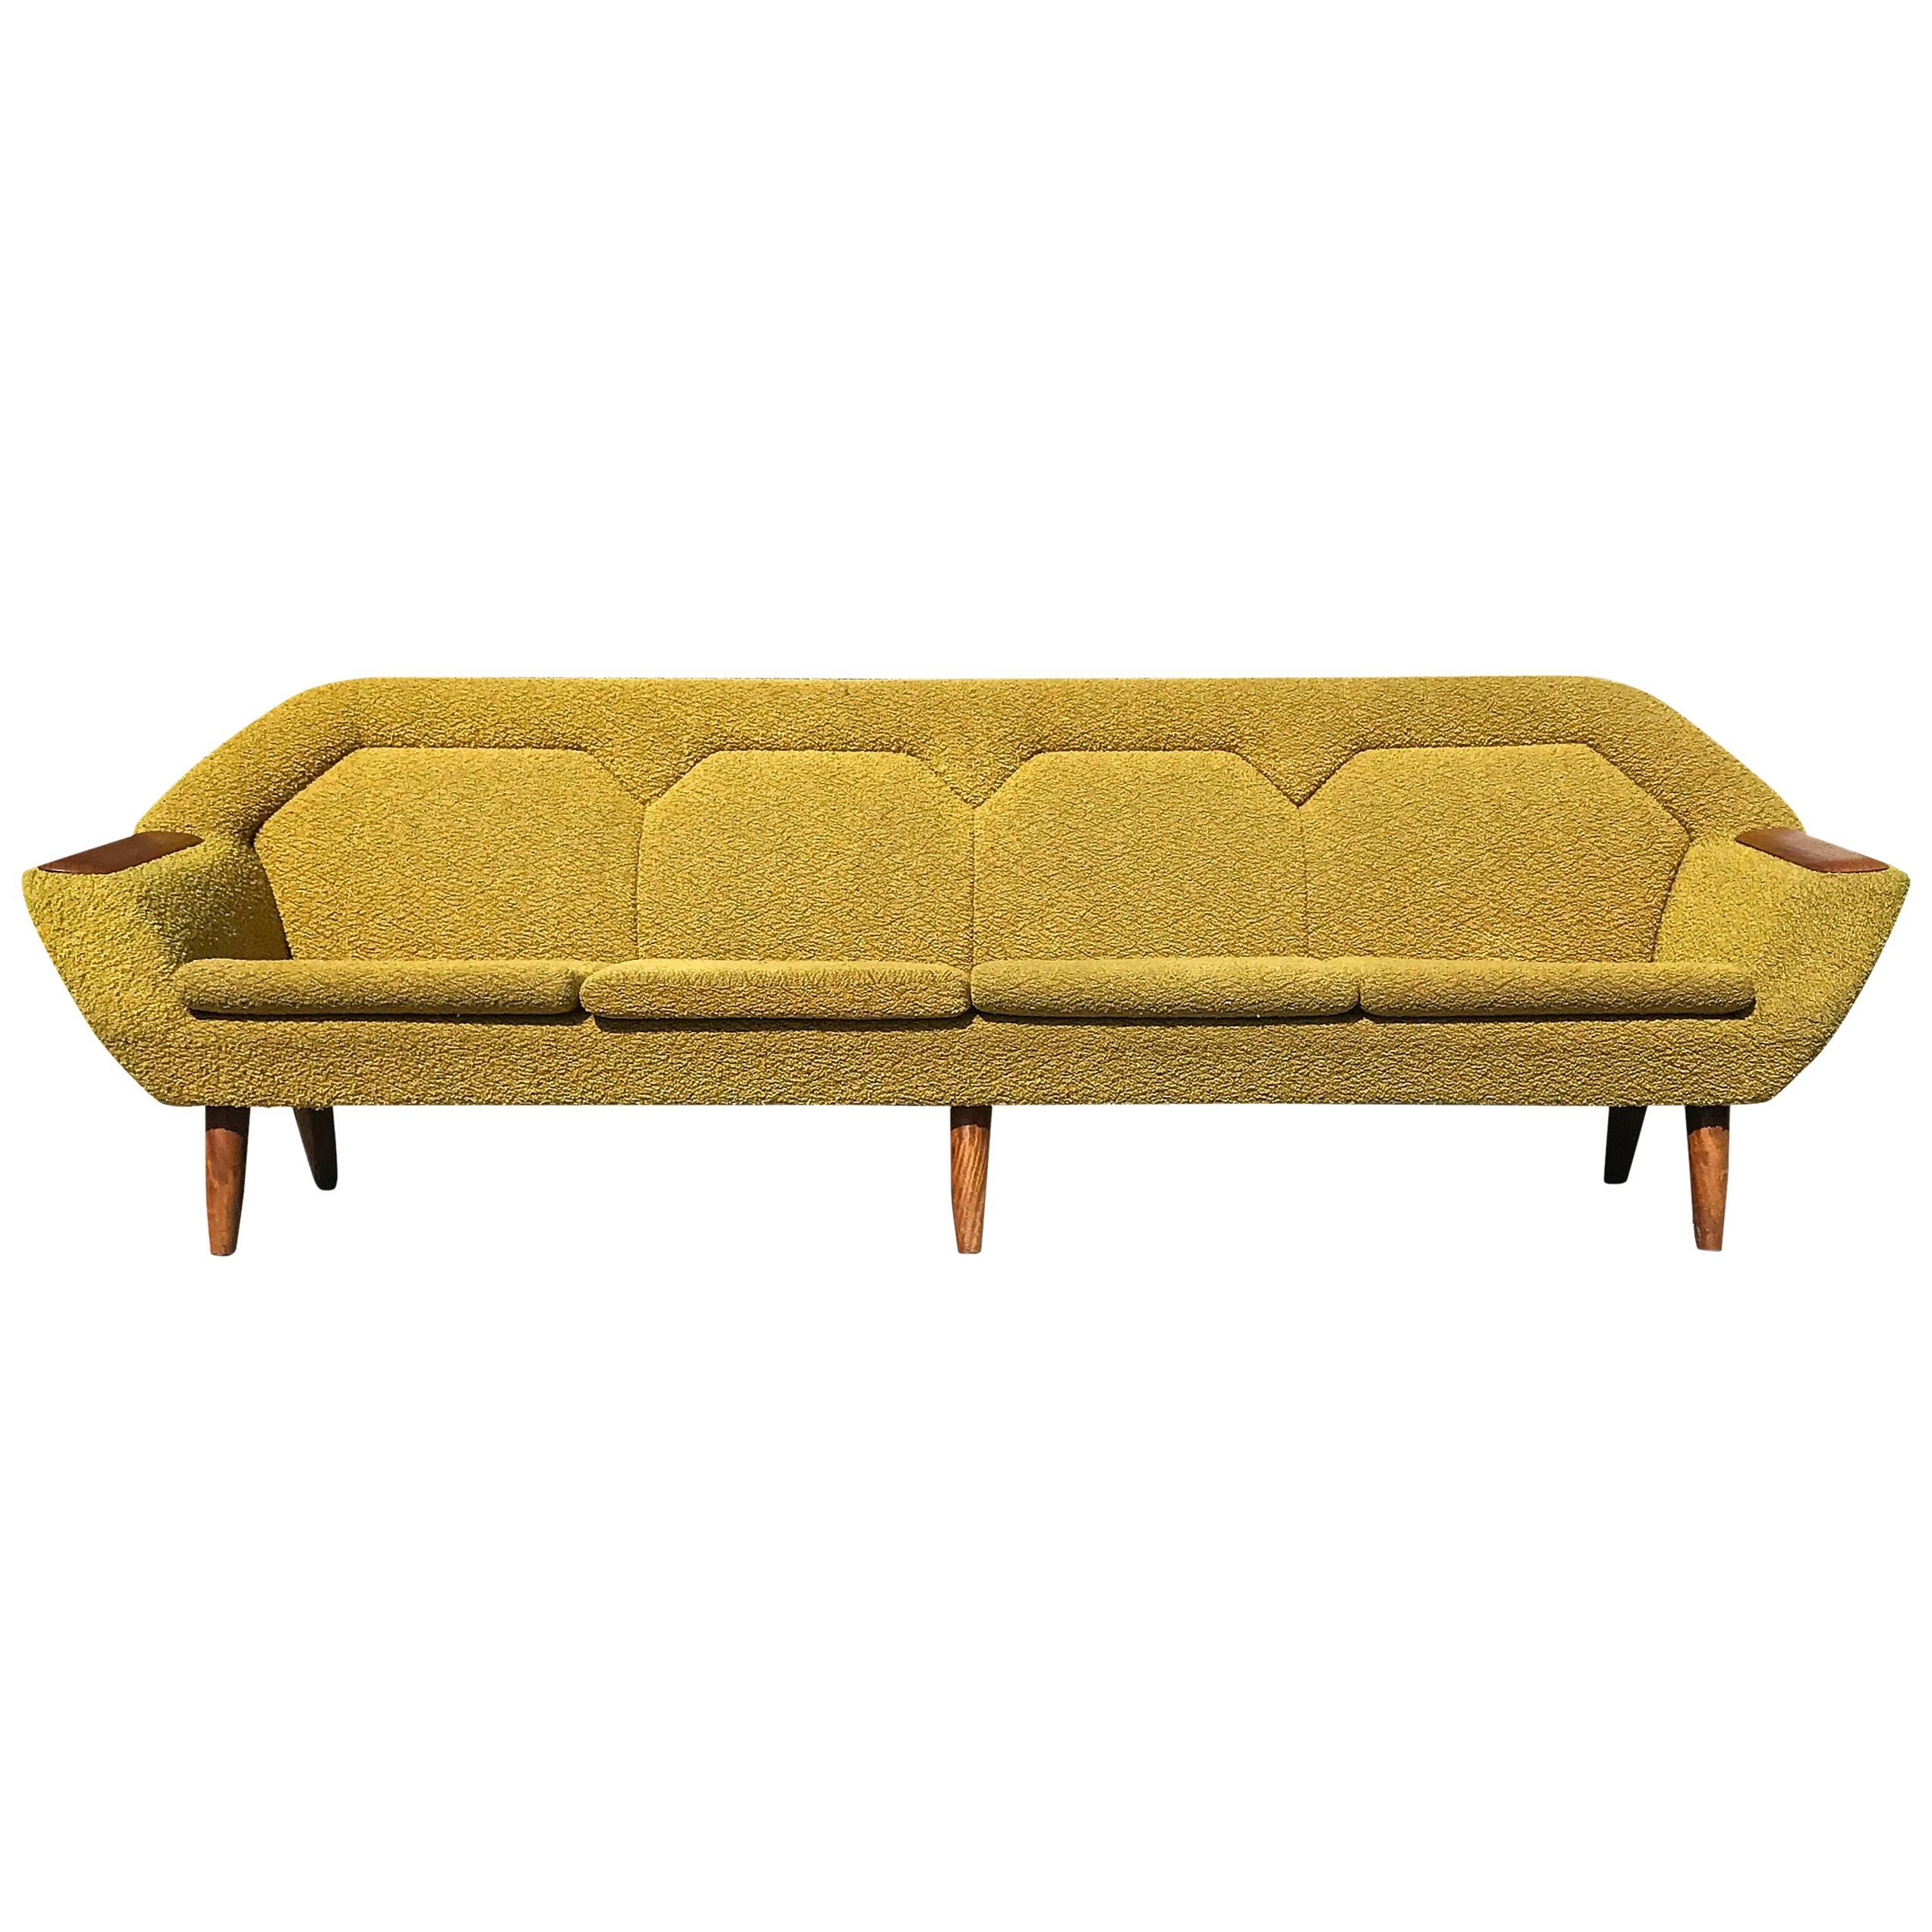 Norwegian Danish Long Four-Seat Sofa Couch with Teak Arms